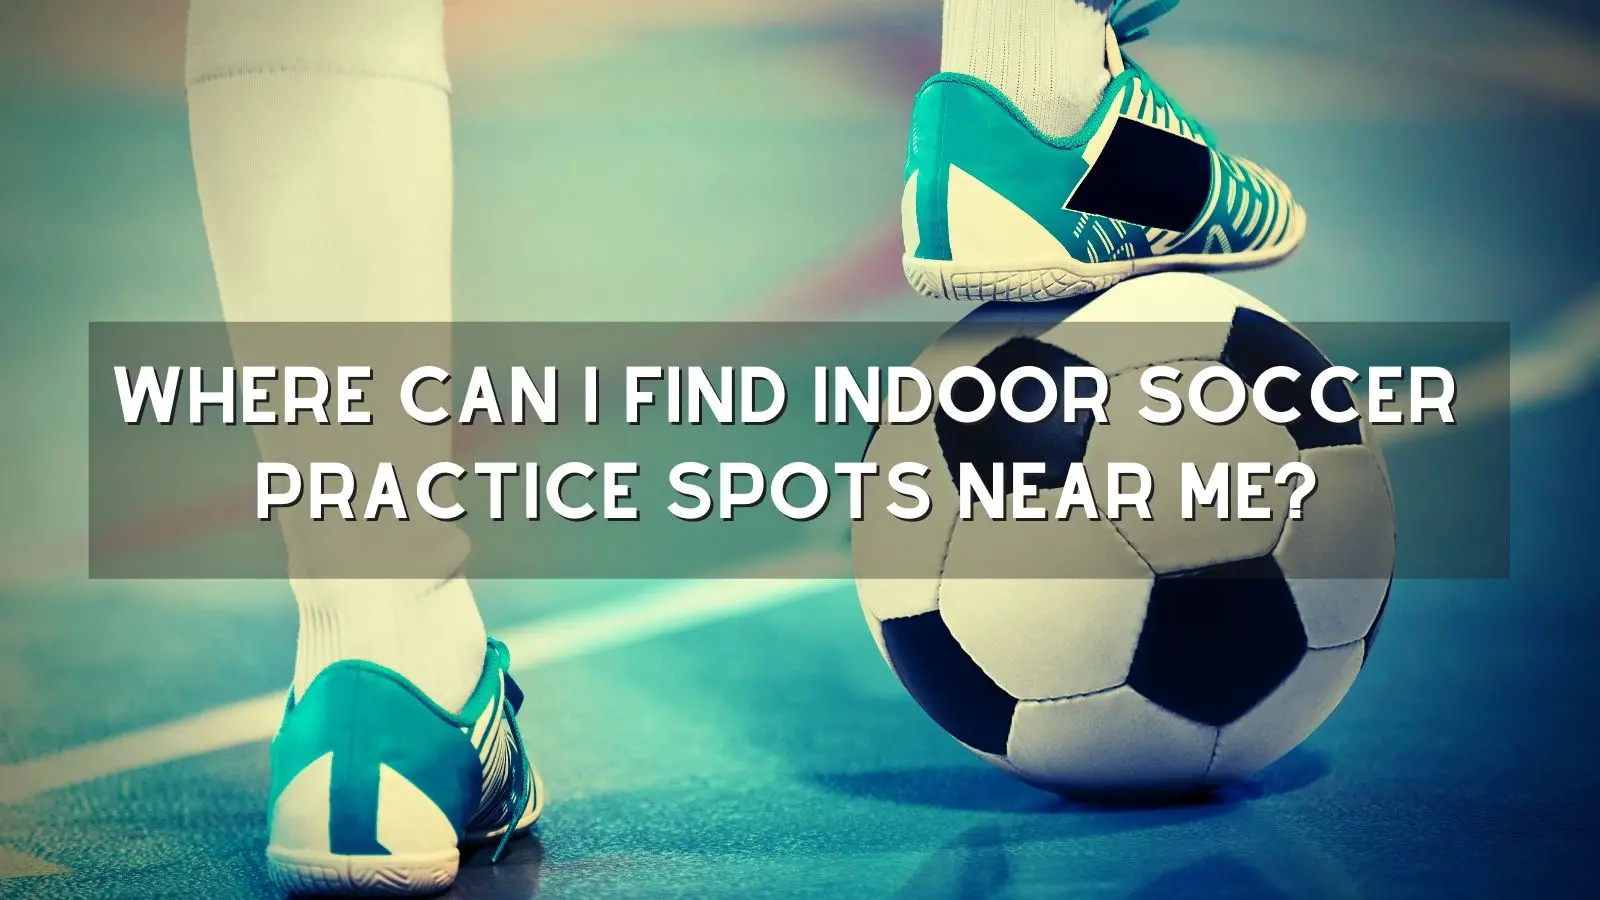 Where Can I Find Indoor Soccer Practice Spots Near Me?